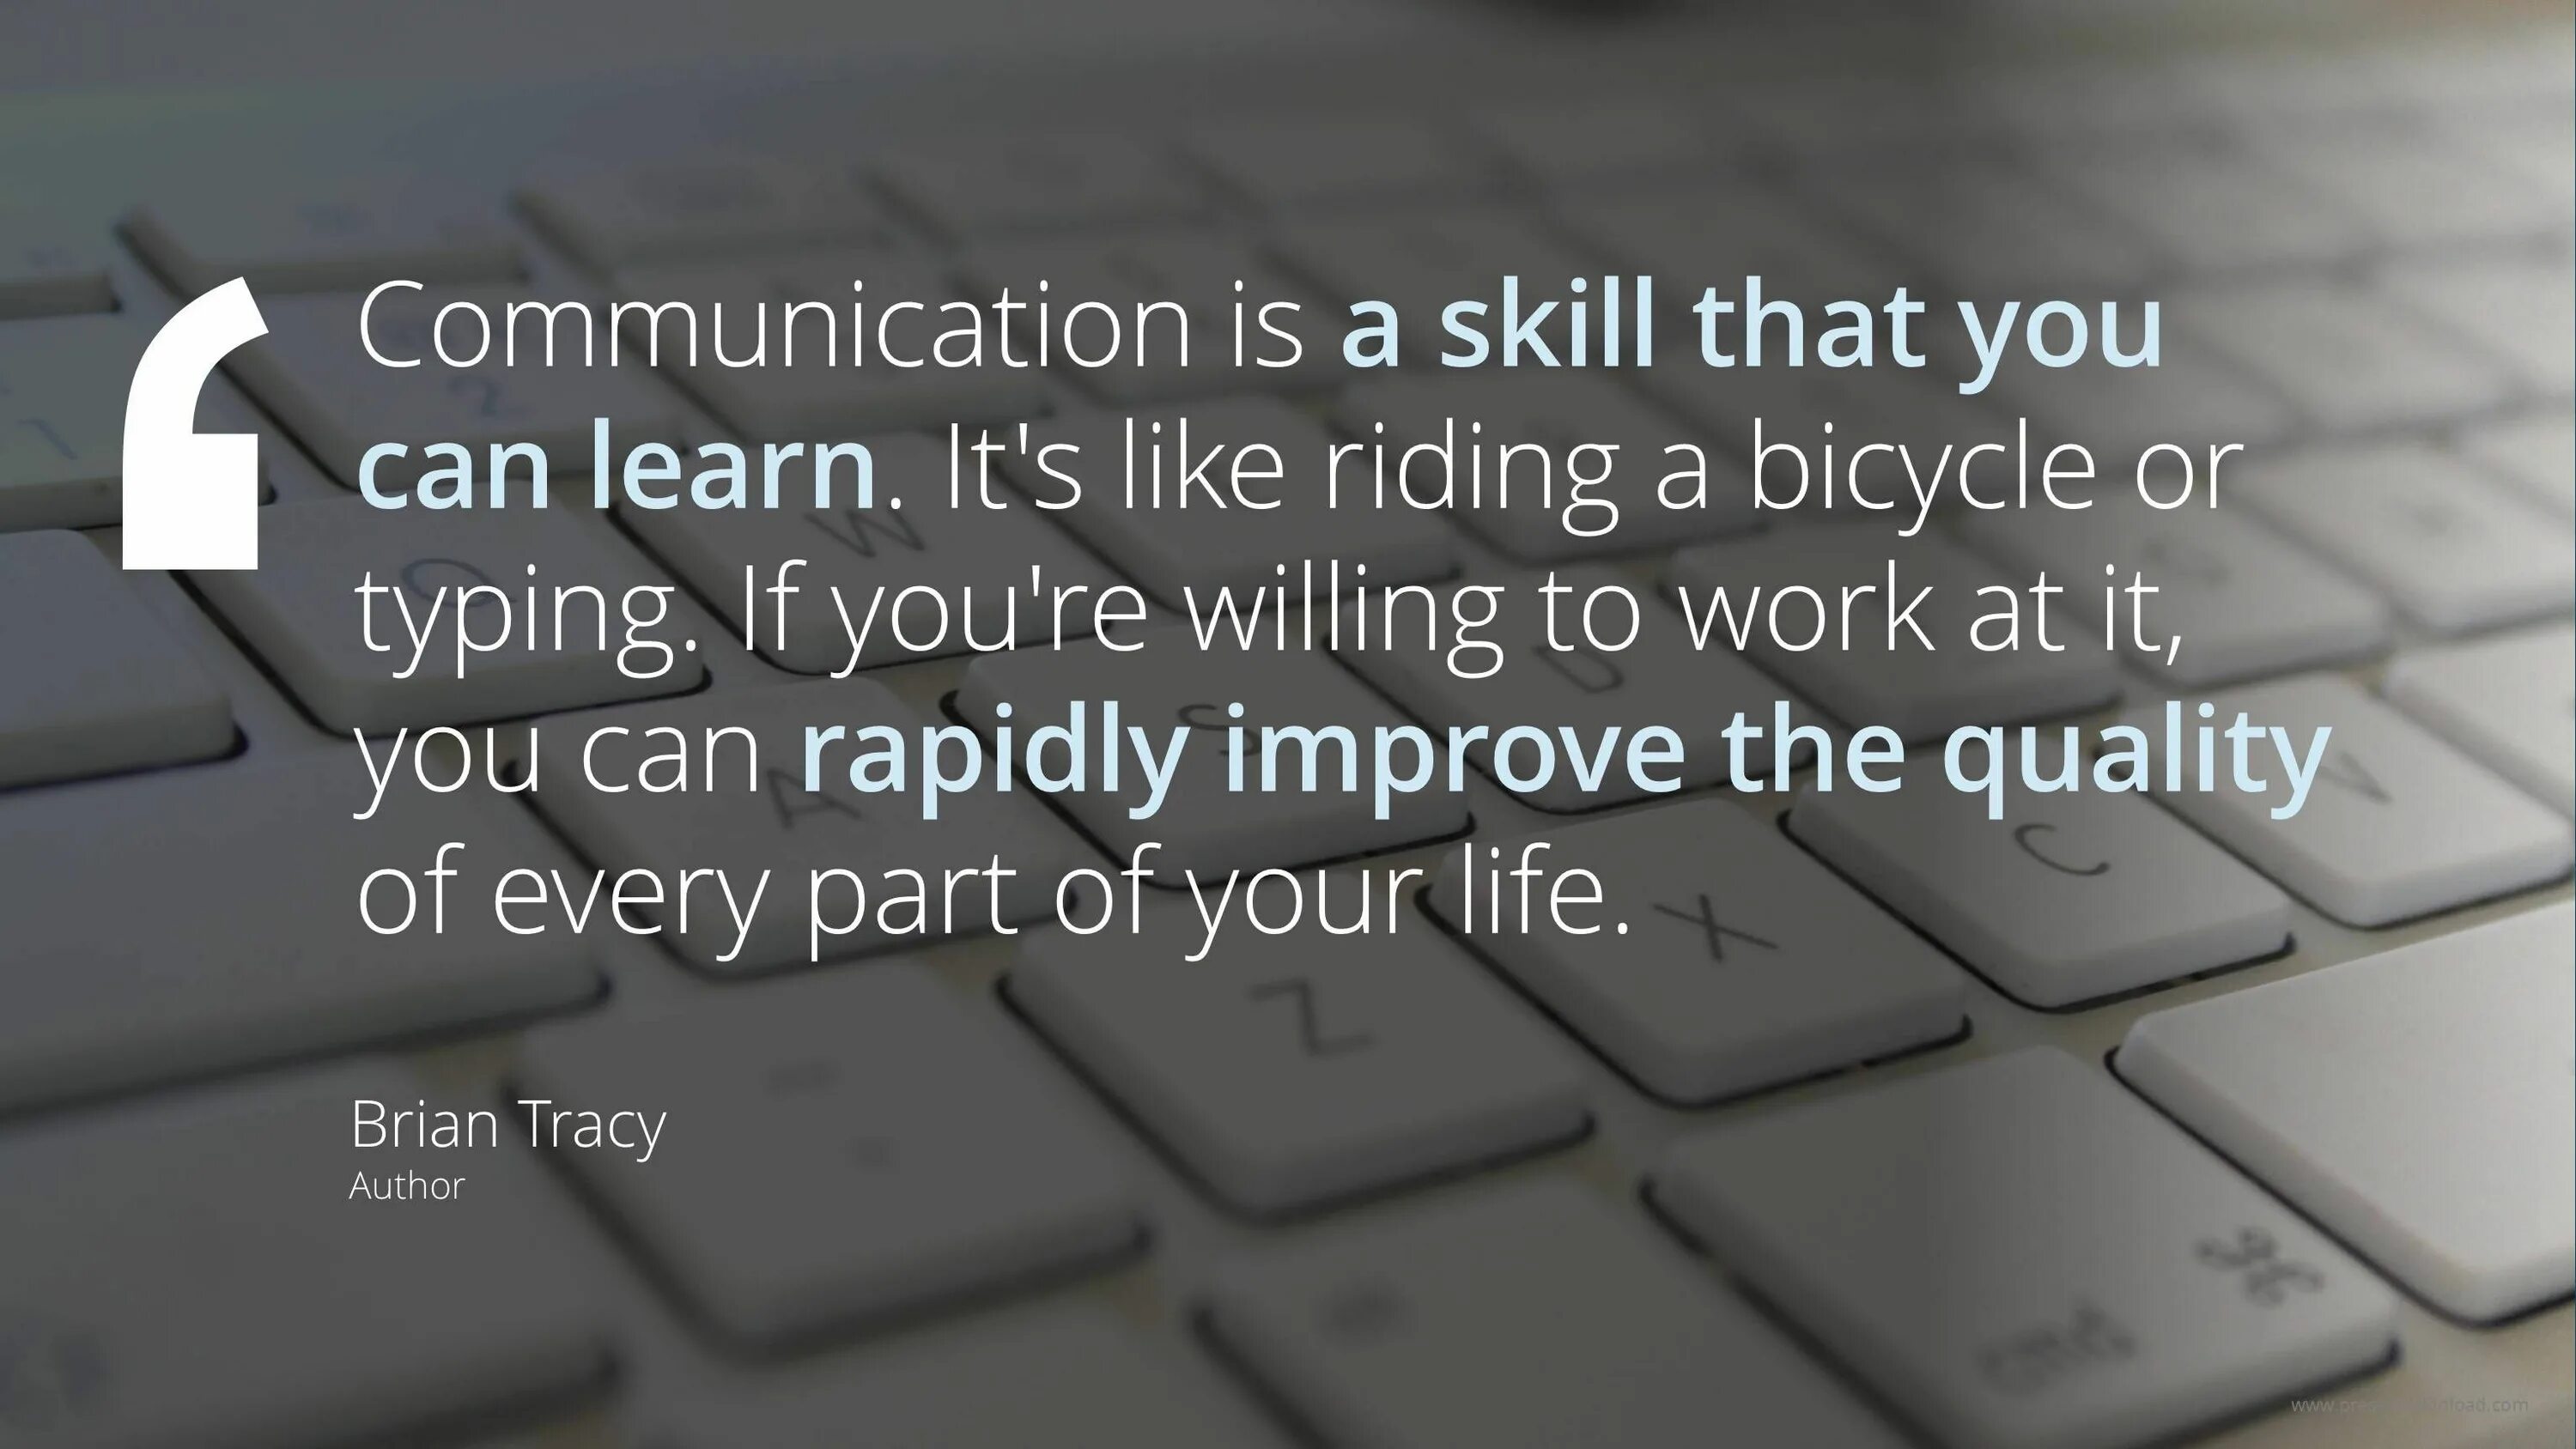 Communication quotes. Quotes about communication. Communication is a skill than you can.learn цитата на русском. Communication is a skill that you can learn. It's like riding a Bicycle Brian Tracy.